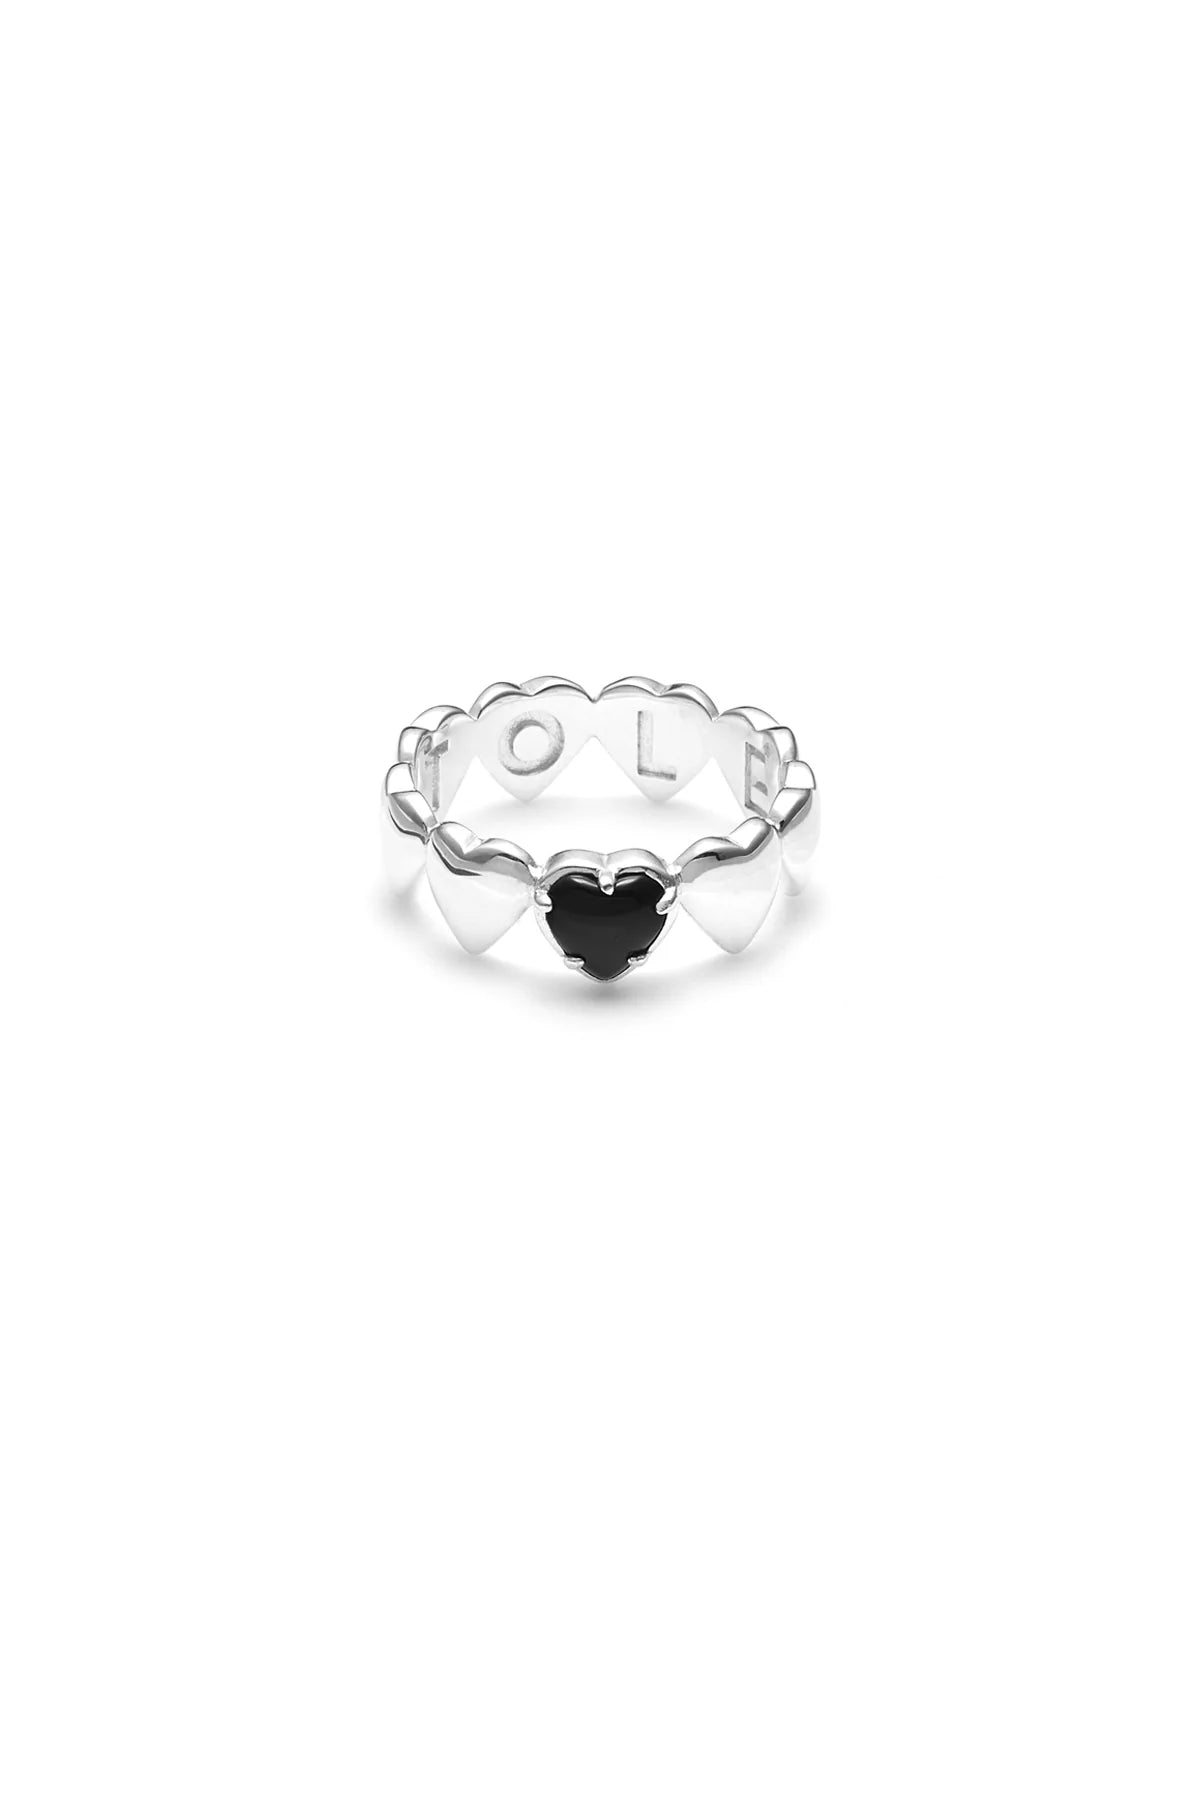 Band of Hearts Ring-N-onyx